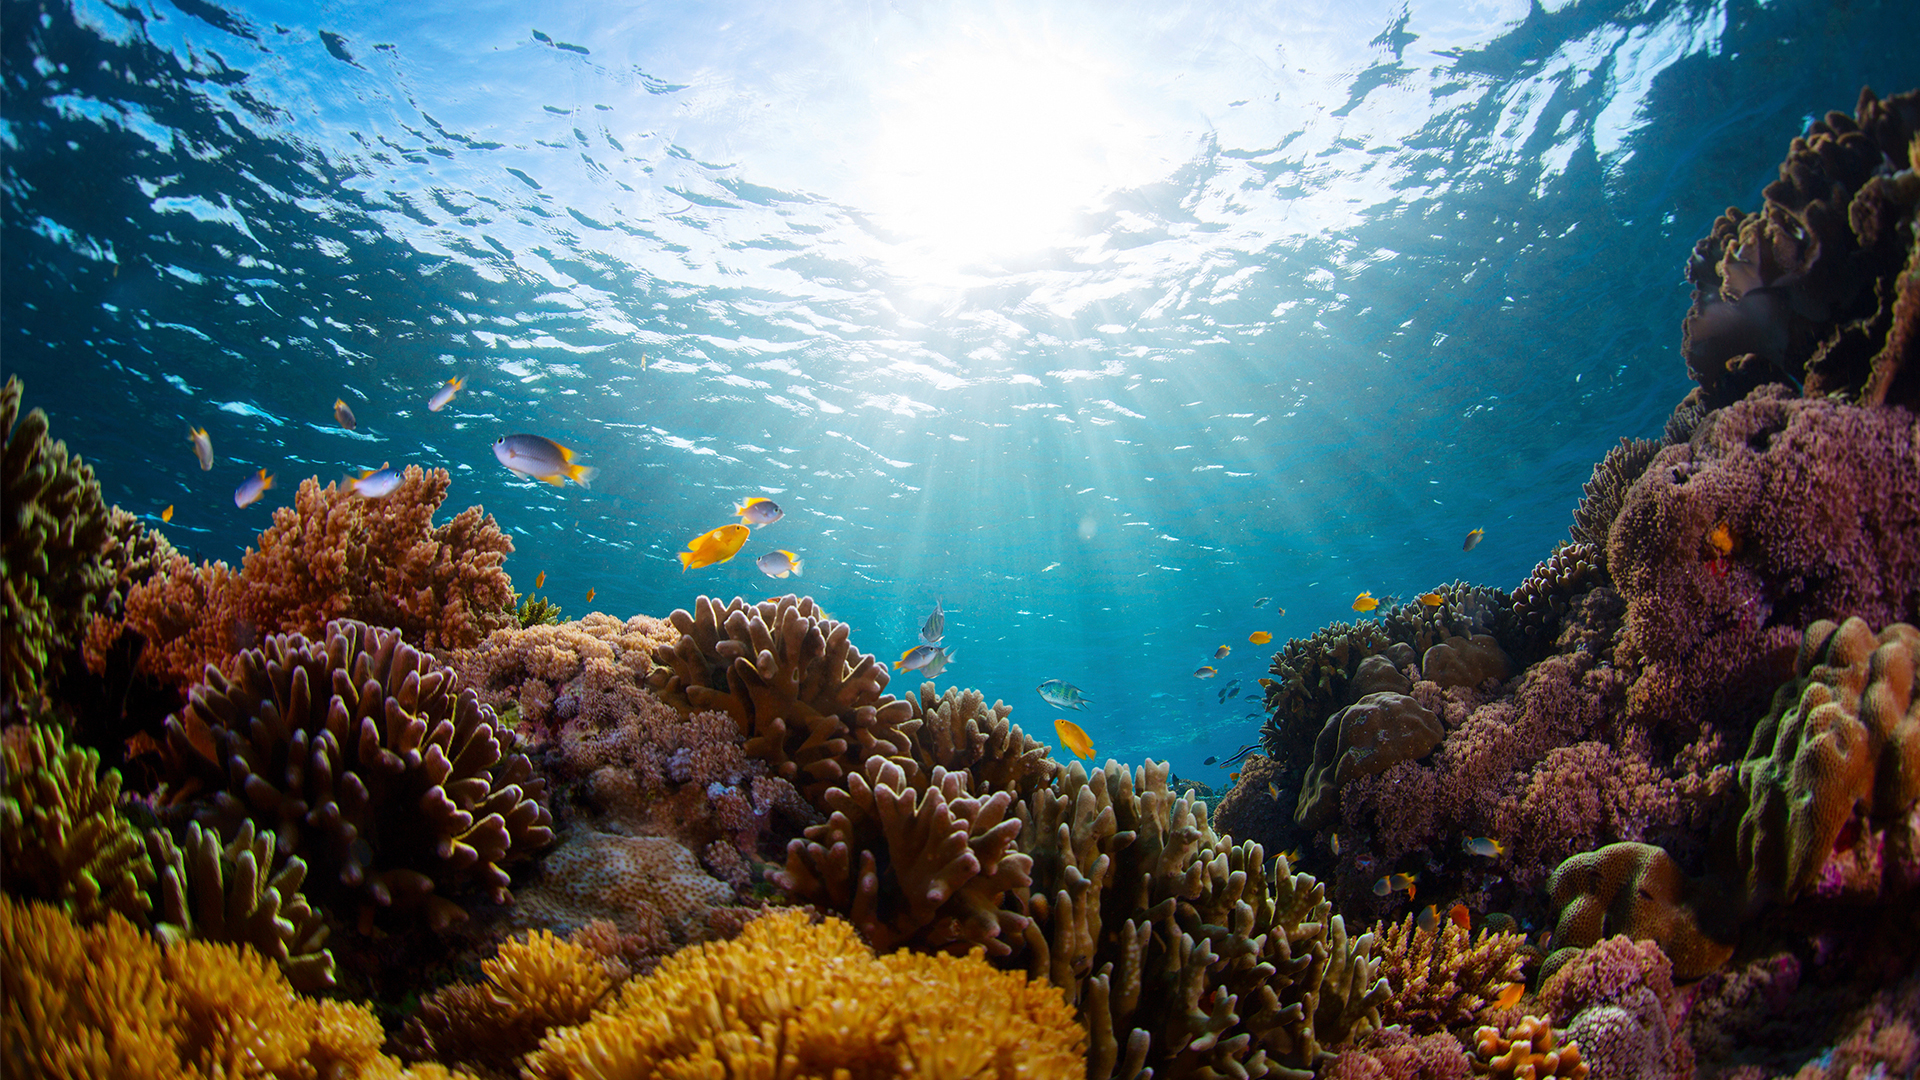 Underwater scene of a coral reef and tropical fish